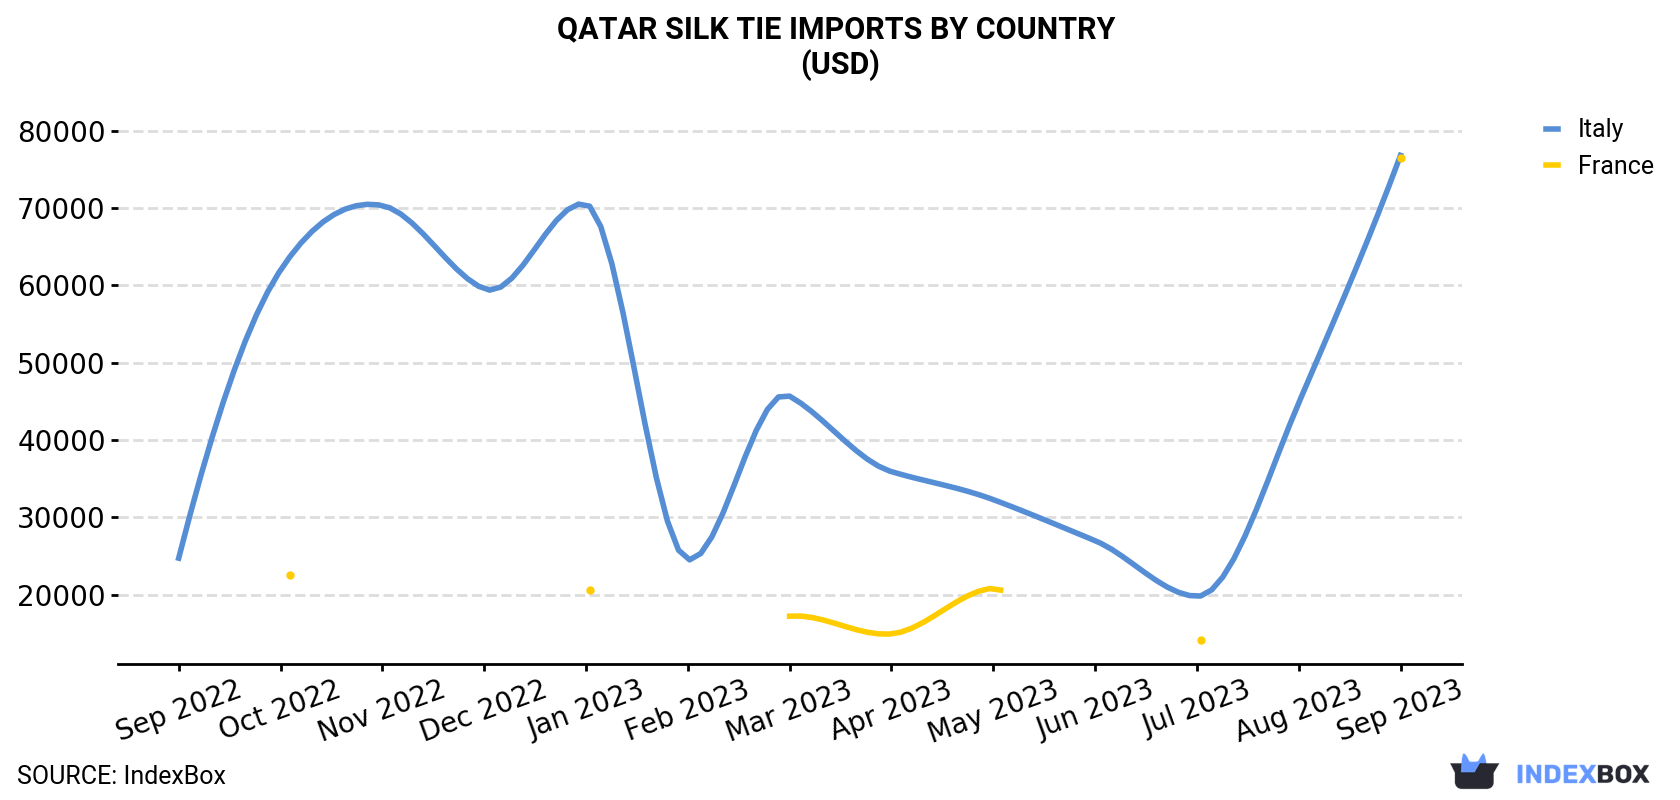 Qatar Silk Tie Imports By Country (USD)